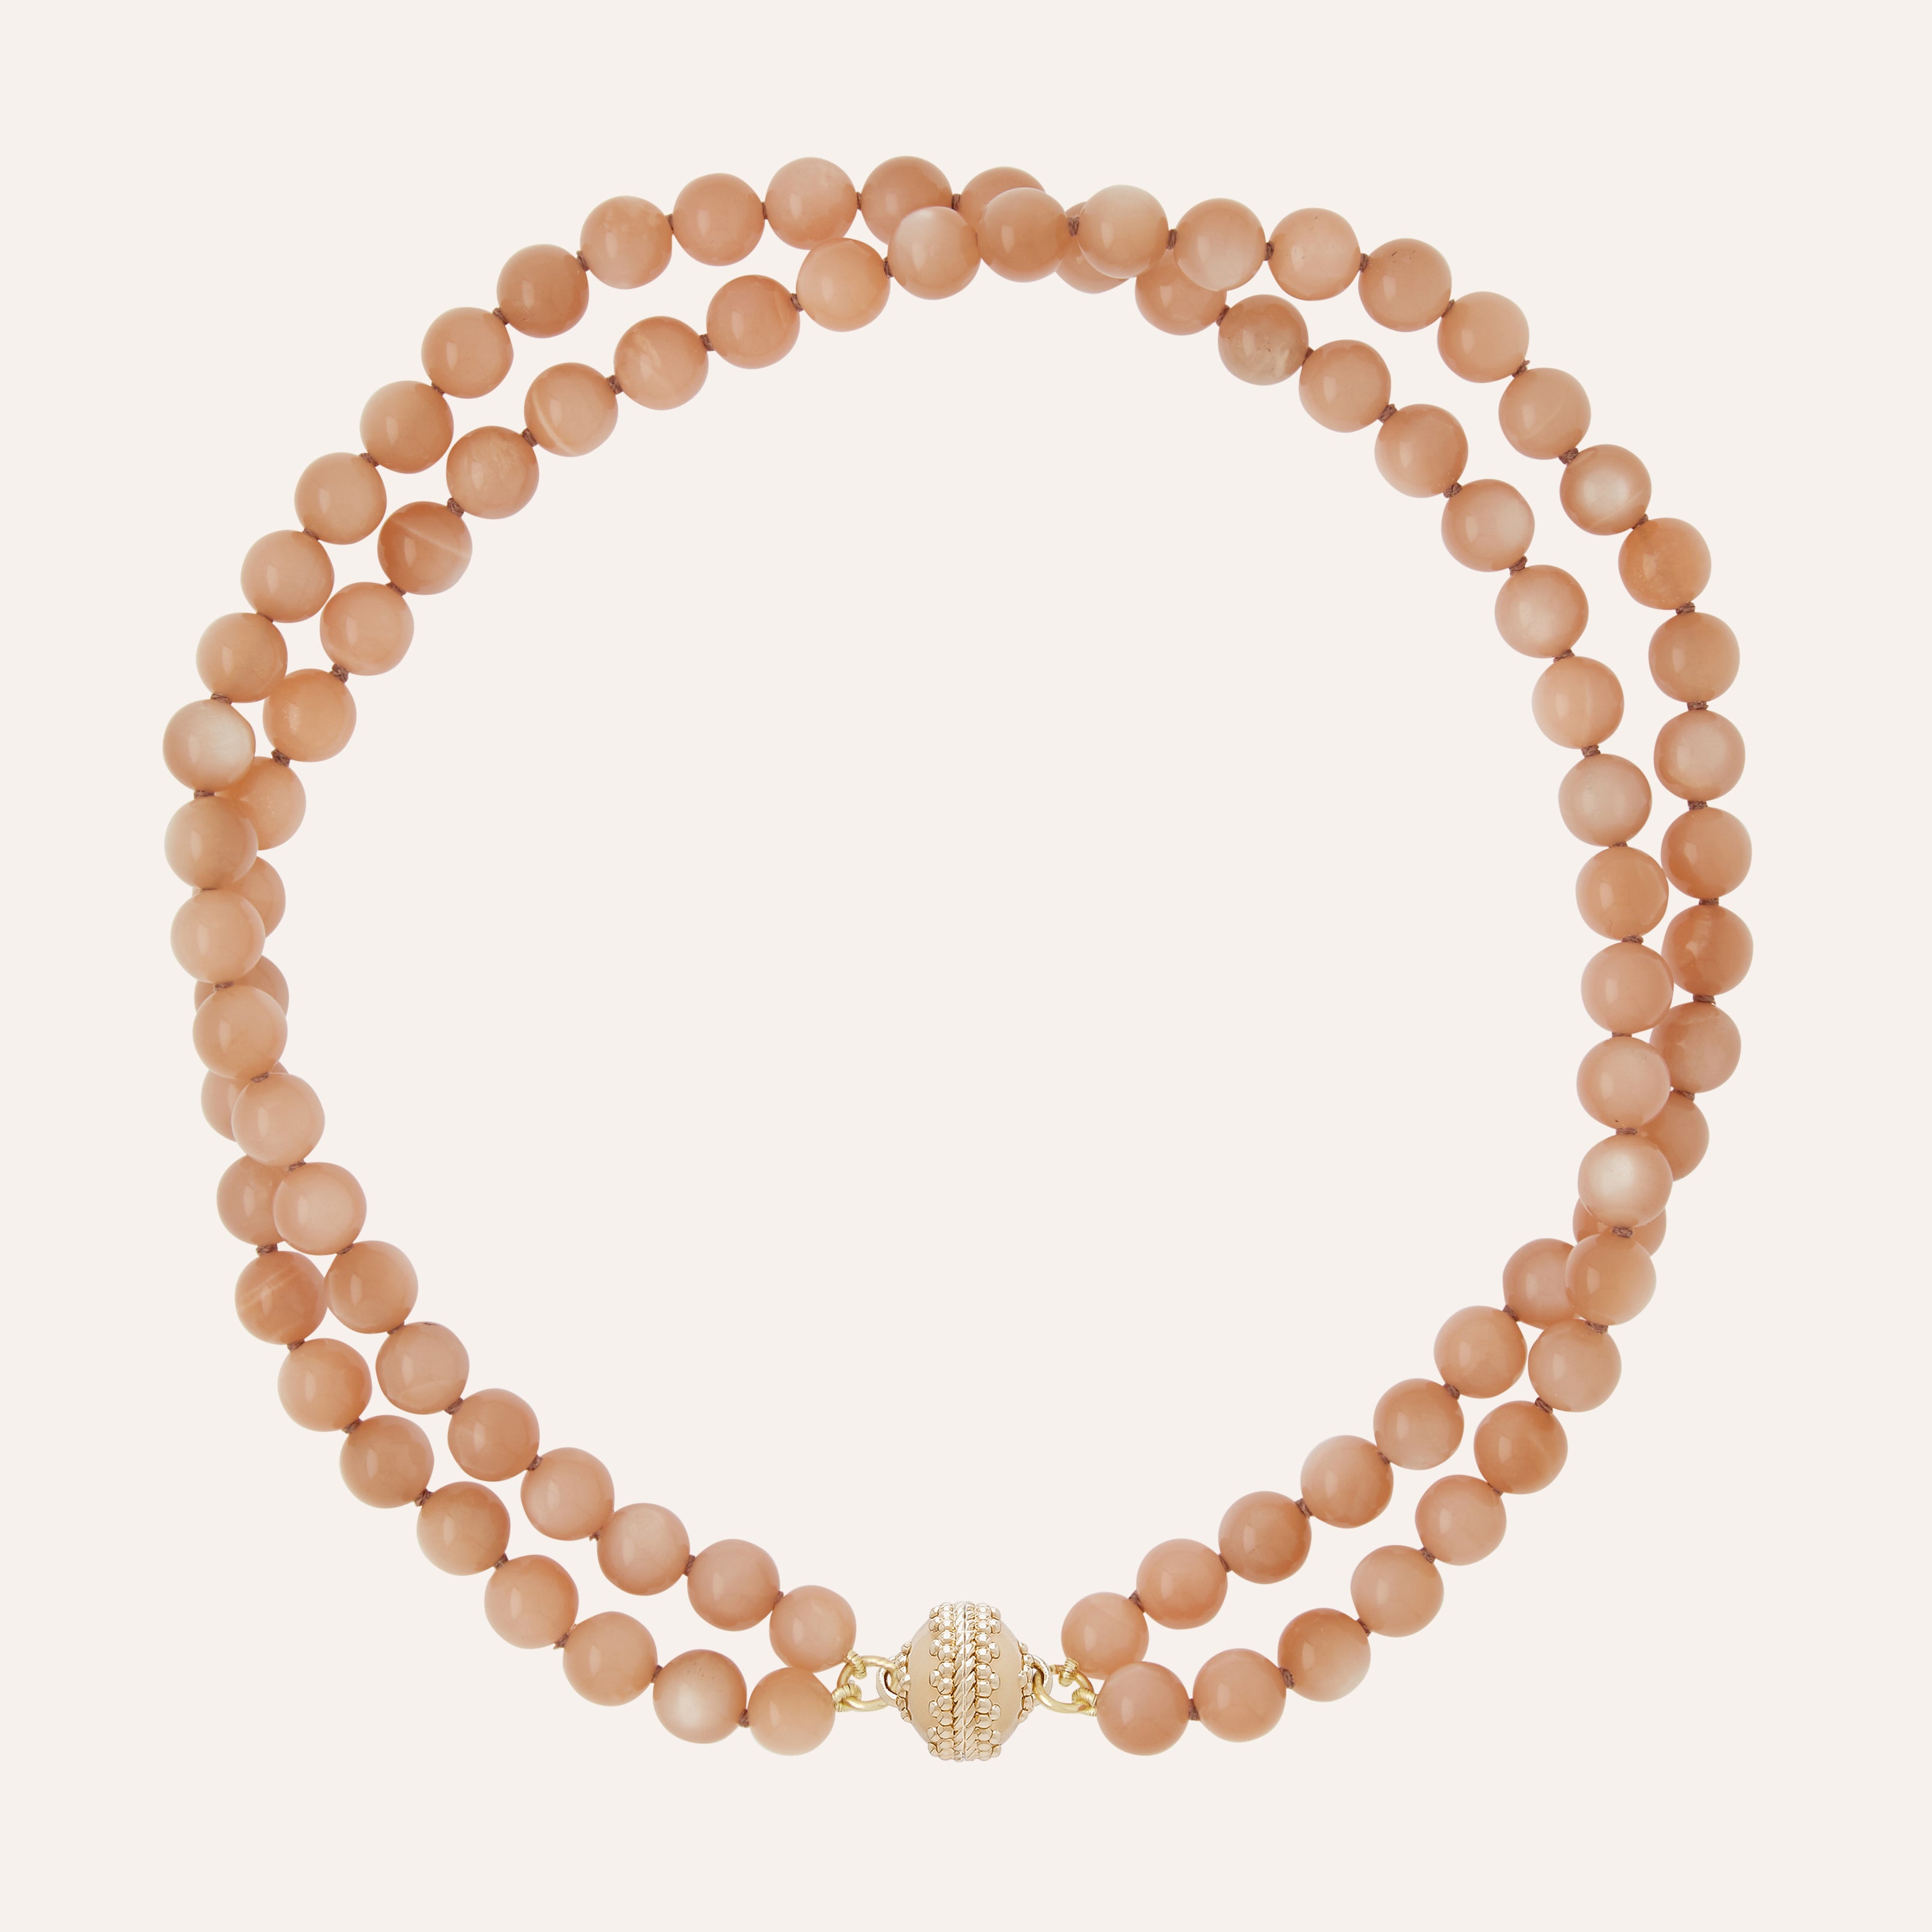 Victoire Peach Moonstone 8mm Double Strand Necklace